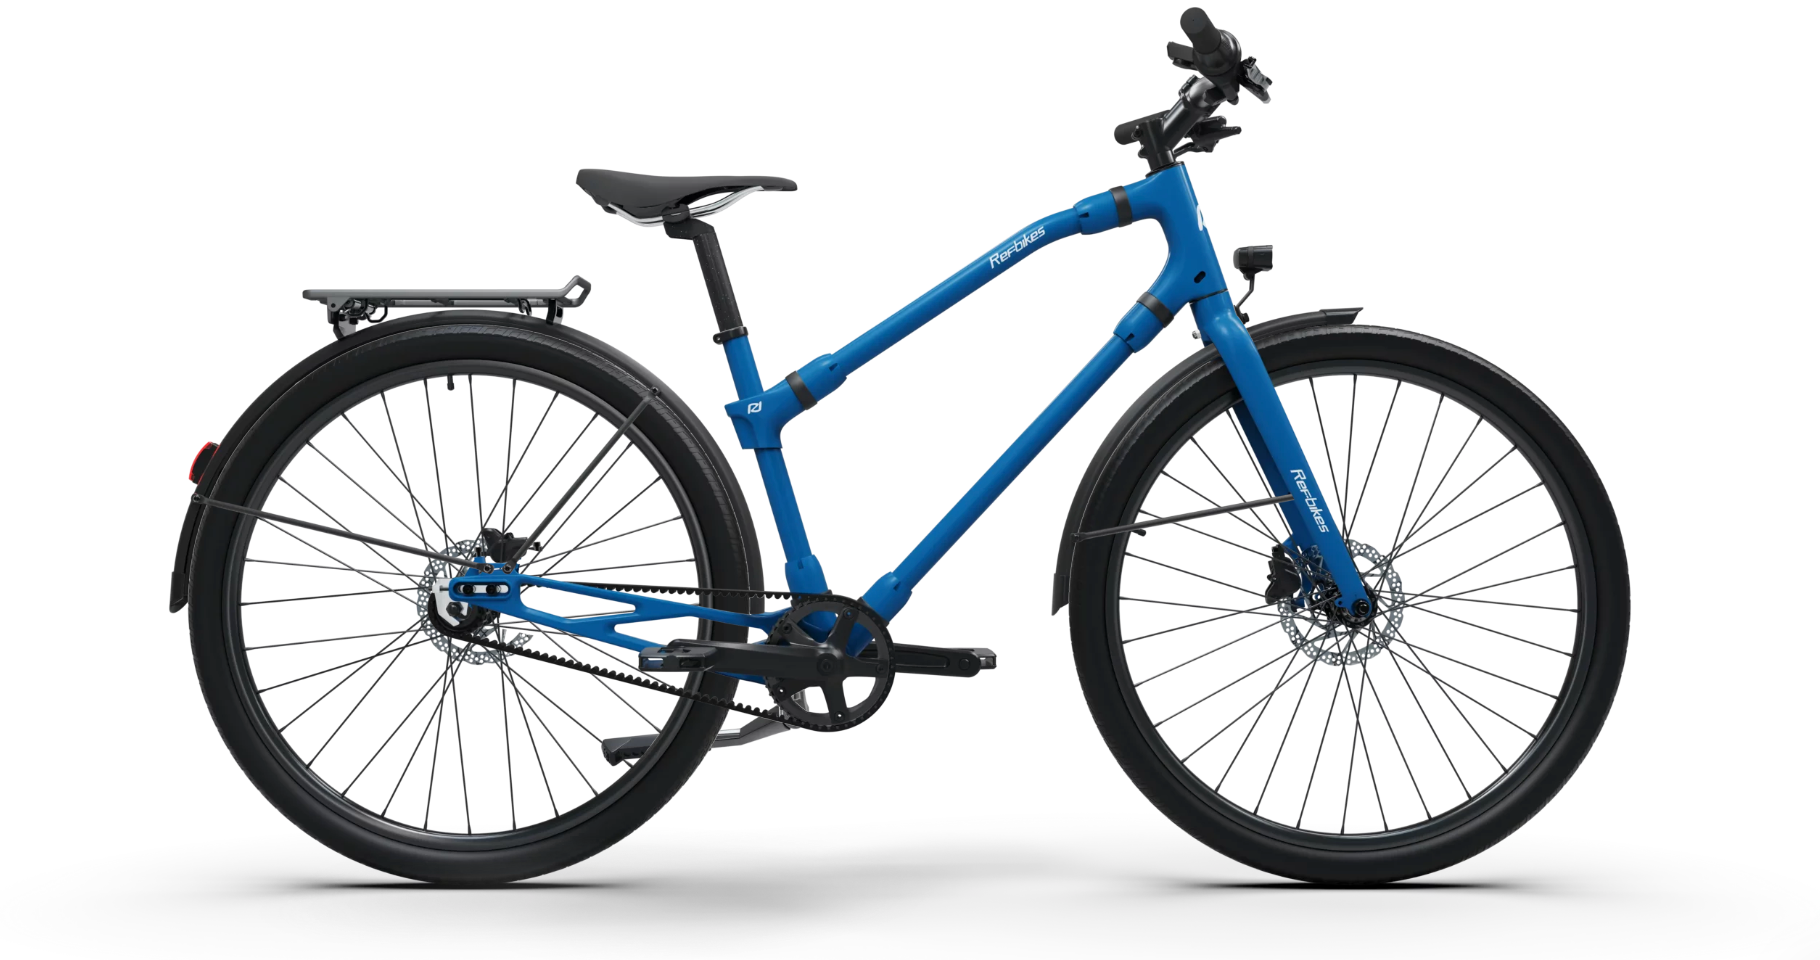 Bold blue Ref Urban bike side view, featuring a durable frame for efficient urban mobility.